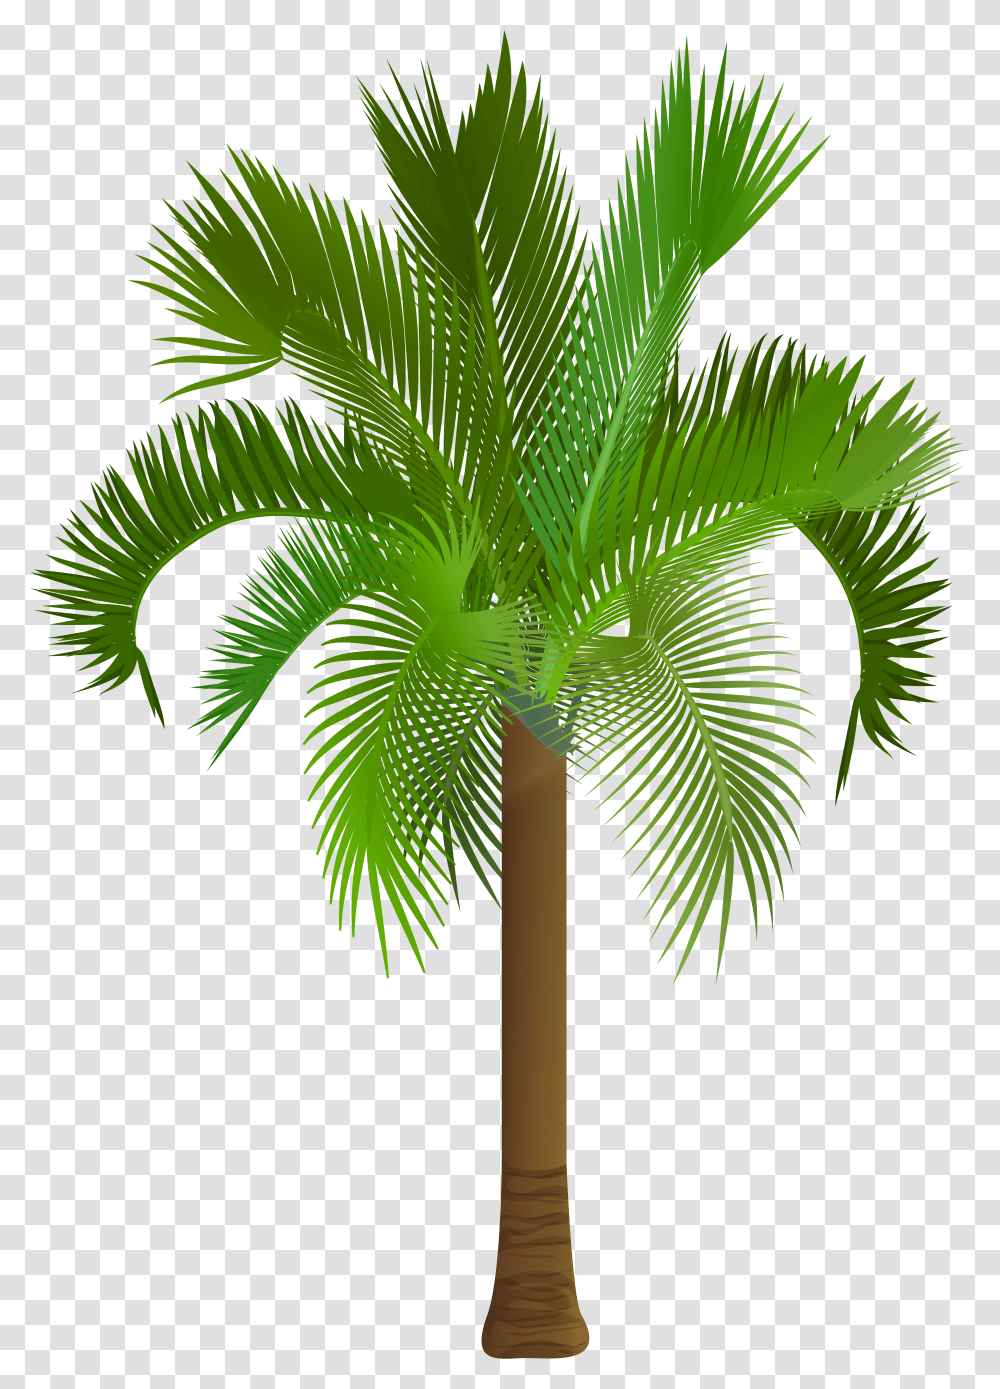 Palm Tree Clip Art Image Is Available For Free Royalty Free Palm Trees Transparent Png